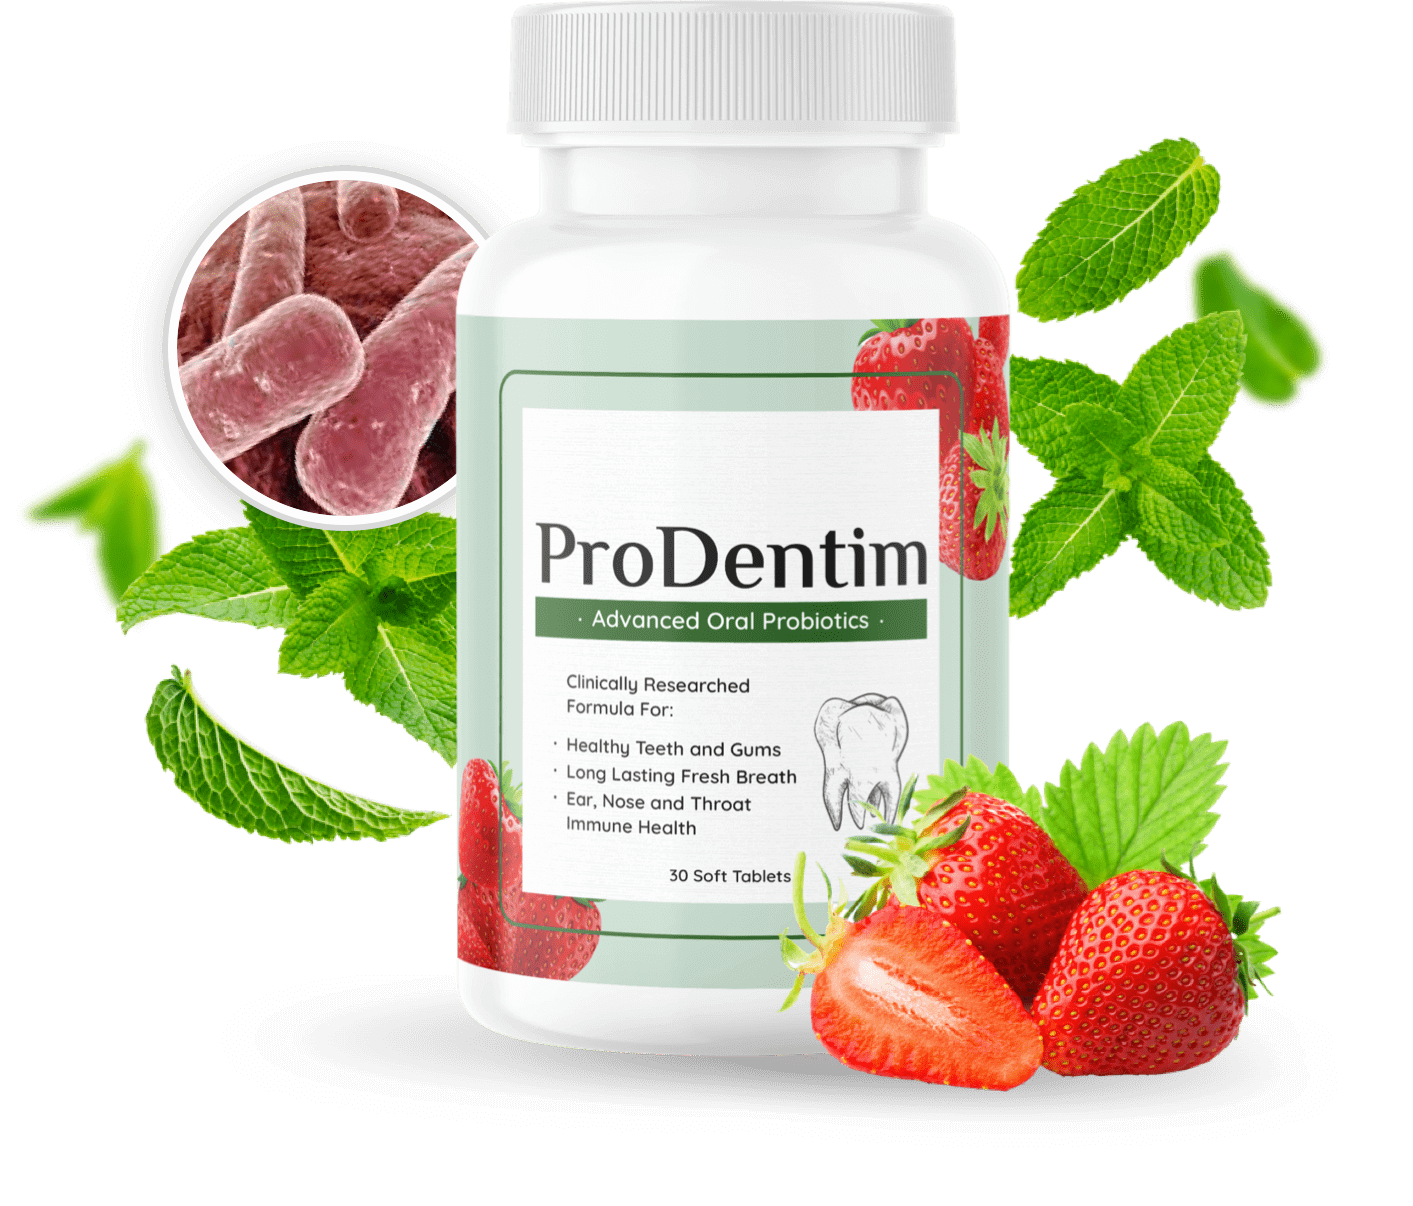 What Scientific Proof Supports ProDentim?